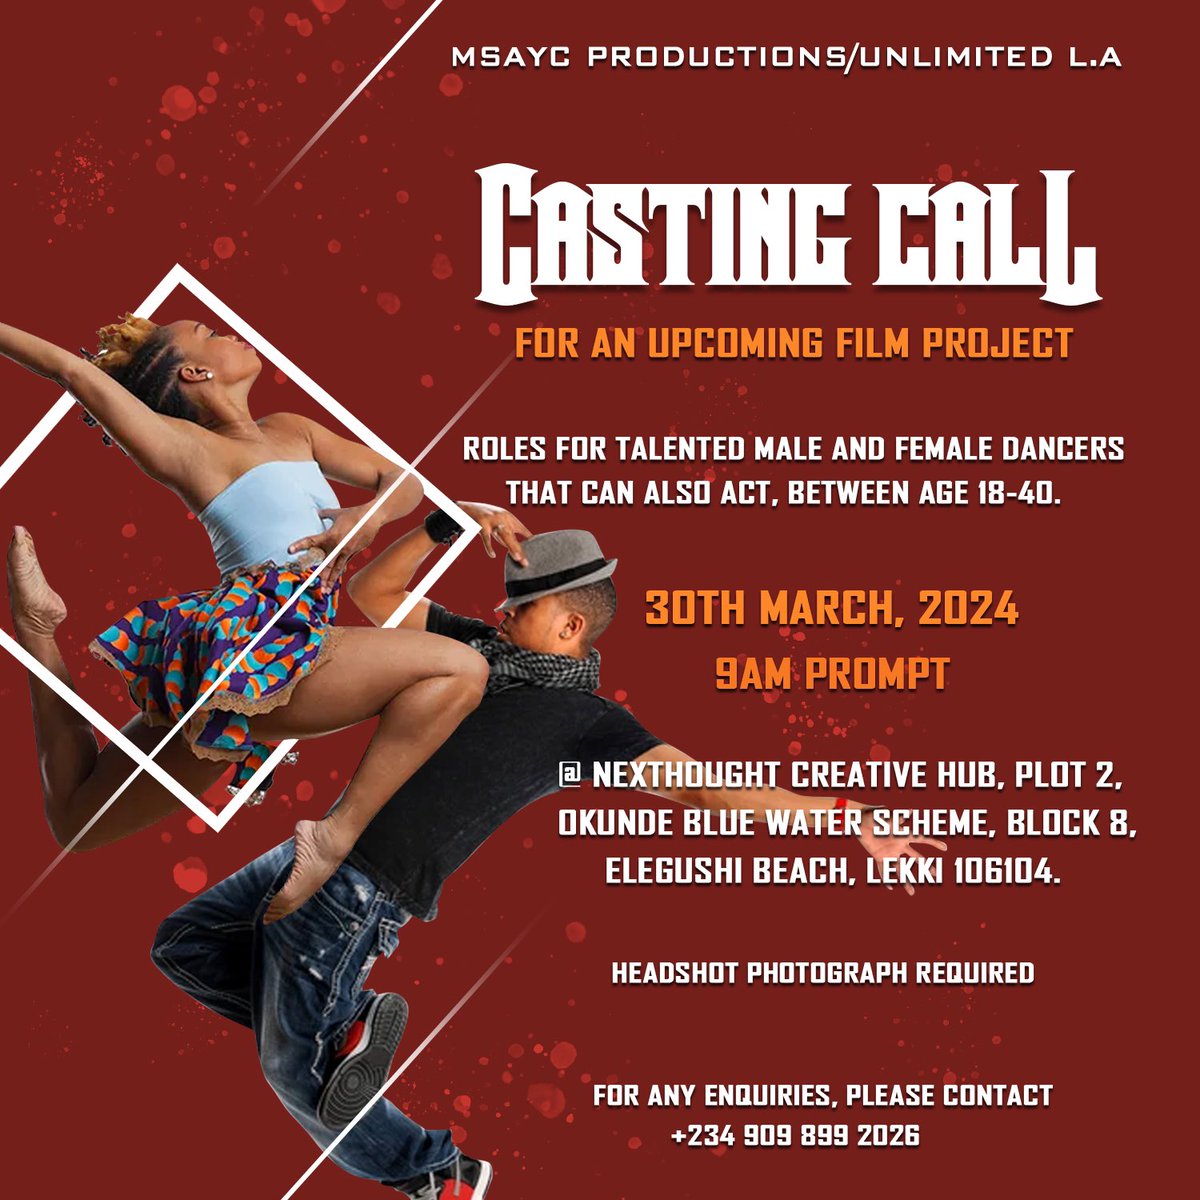 Calling for Dancers and Actors, and dancers that can act! MSAYC Productions is holding an audition for men and women aged 18-40 who know how to move, and how to deliver a great performance. Date: 30th March, 2024 Time: 9AM PROMPT Venue: NEXTTHOUGHT CREATIVE HUB, Lekki